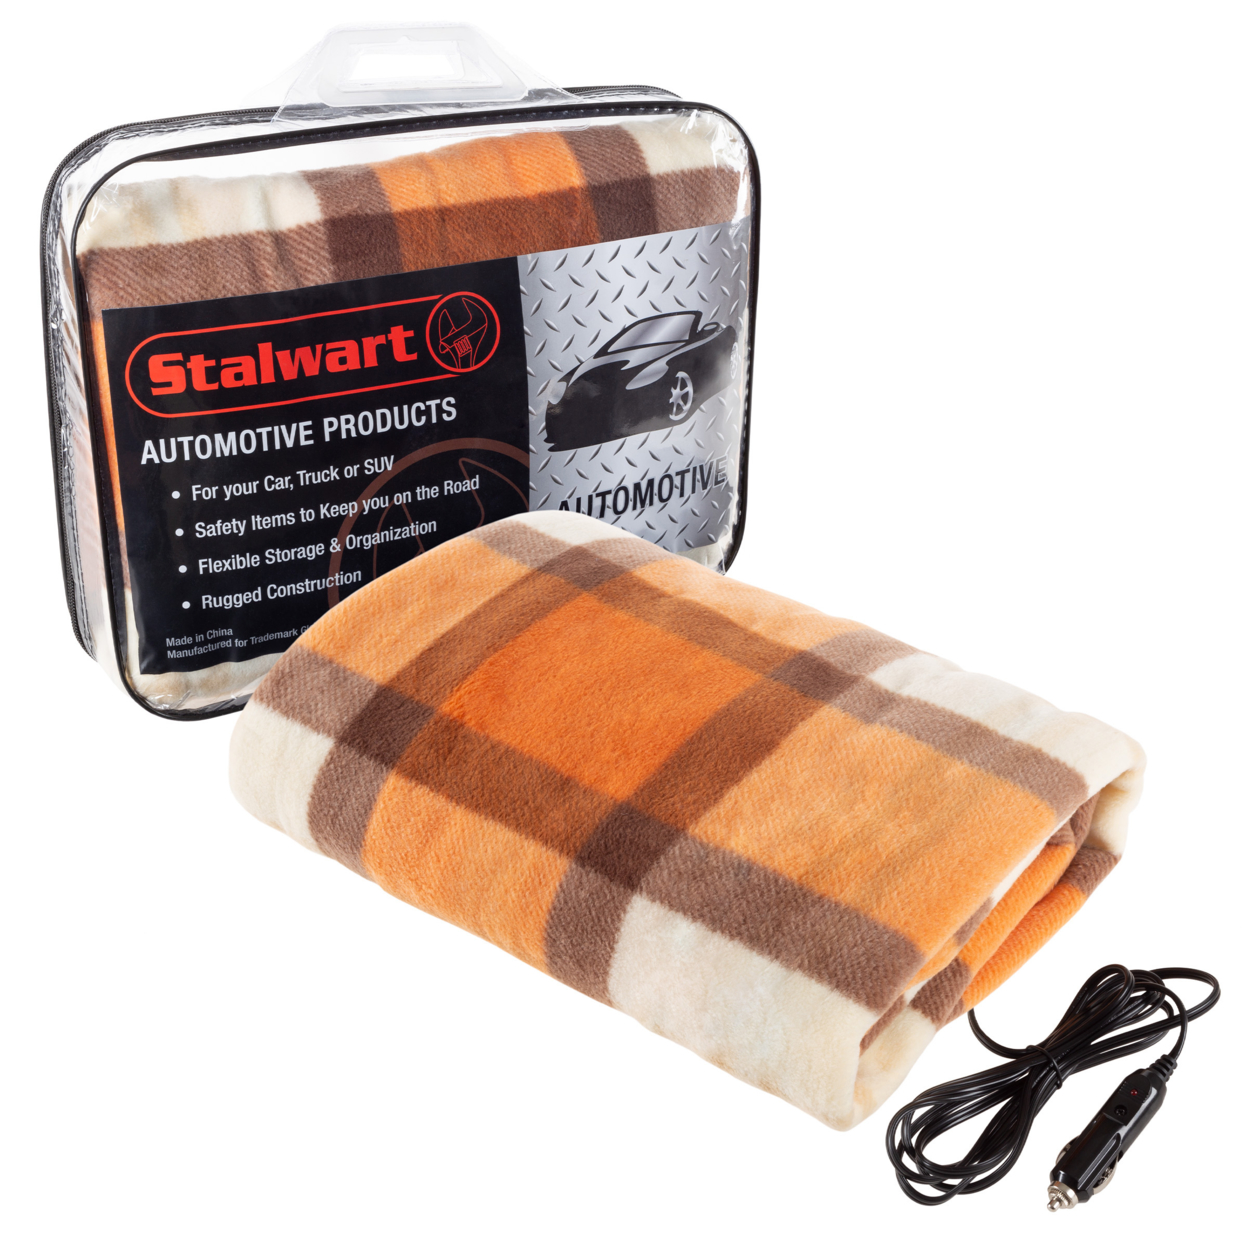 Electric Car Blanket- Heated 12V Polar Fleece Travel Throw For Car, Truck & RV-Great For Cold Weather Orange Plaid